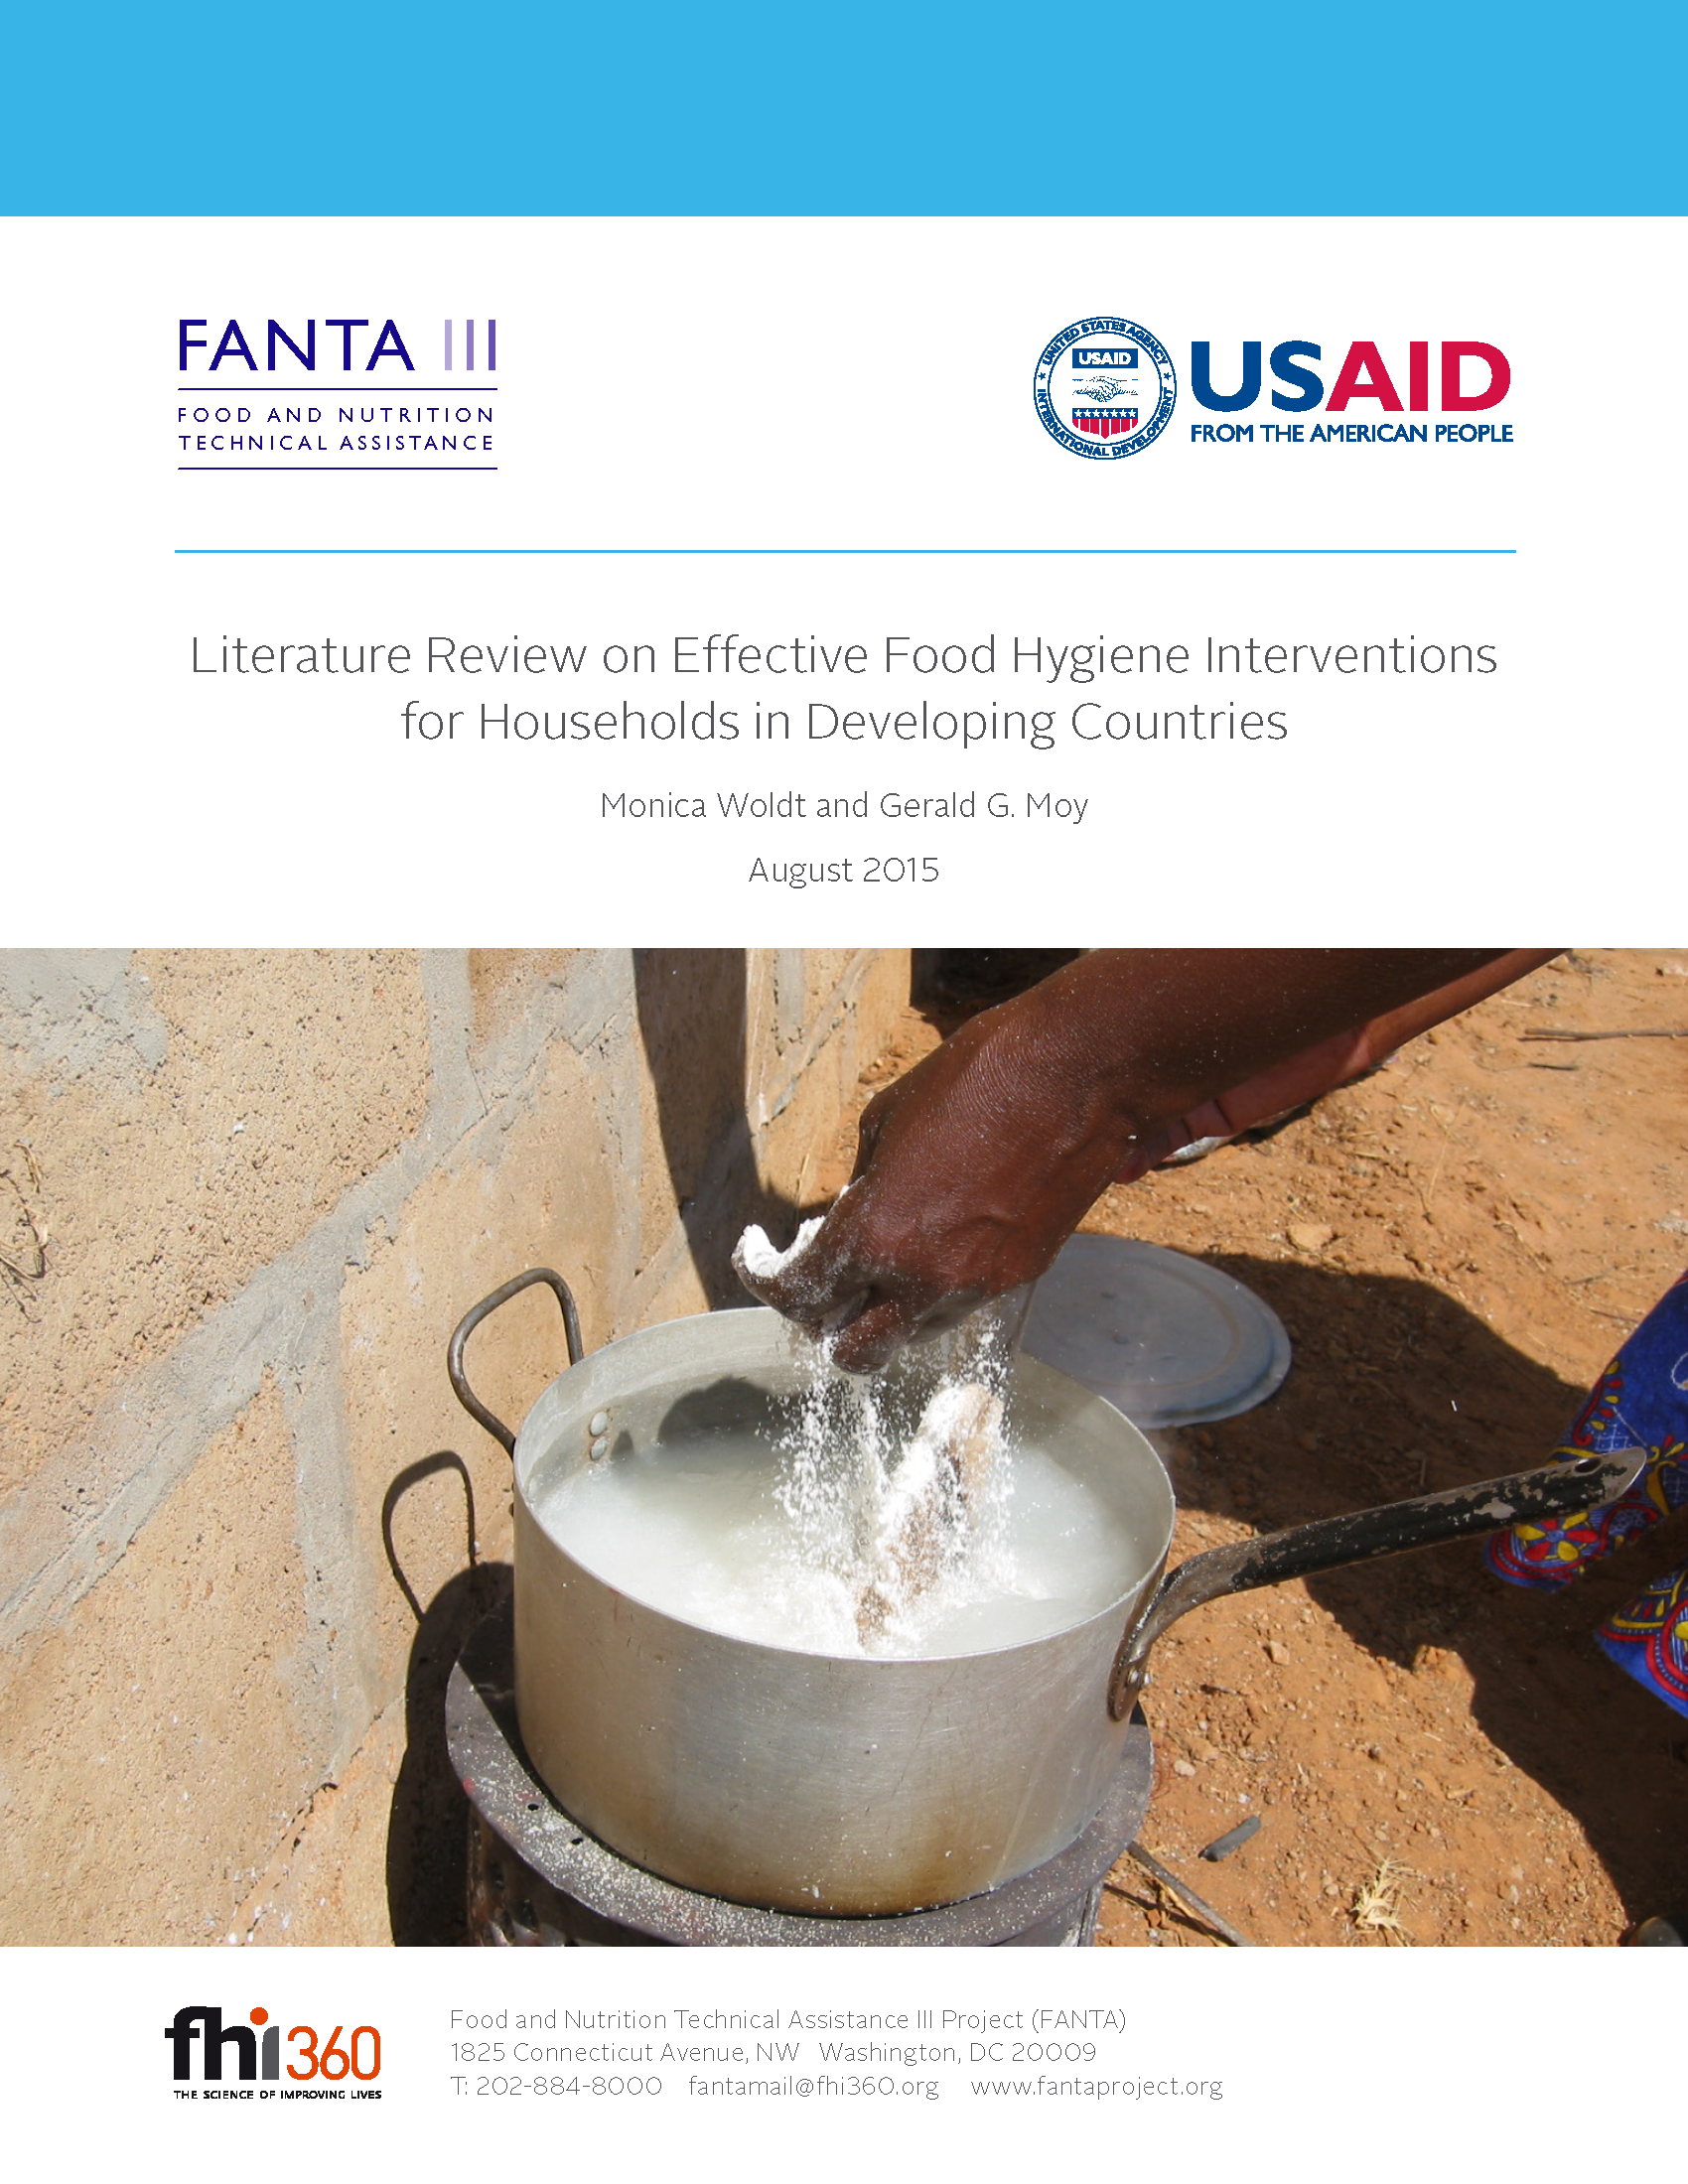 Cover Page for Literature Review on Effective Food Hygiene Interventions for Households in Developing Countries